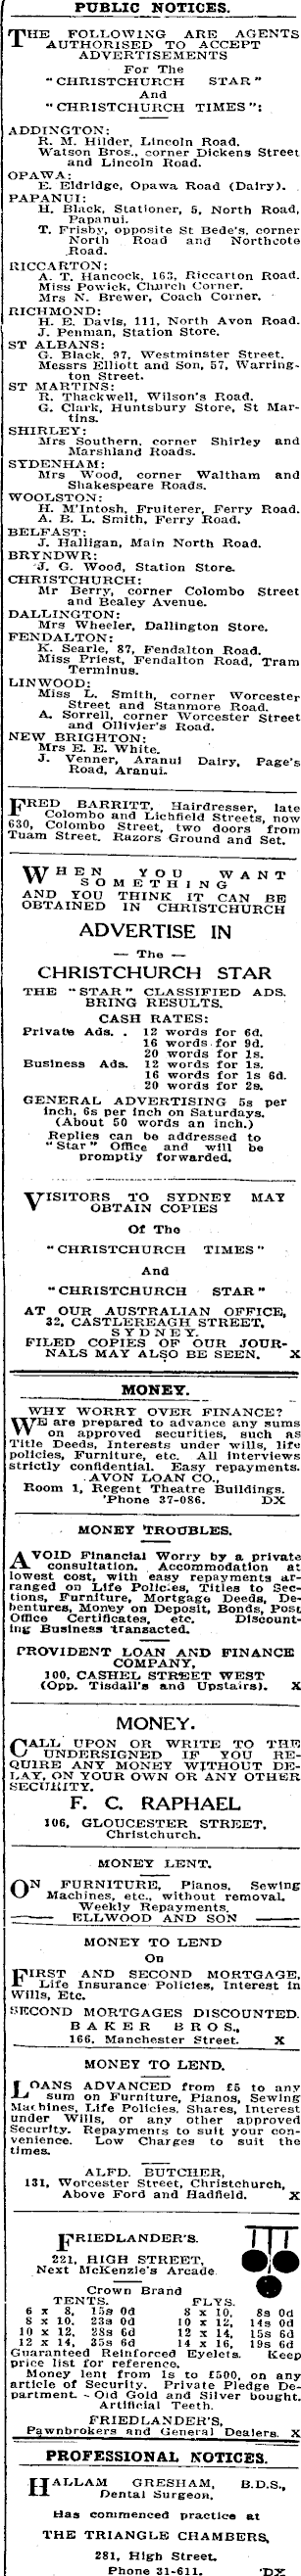 Papers Past Newspapers Star Christchurch 16 November 1932 Page 12 Advertisements Column 2